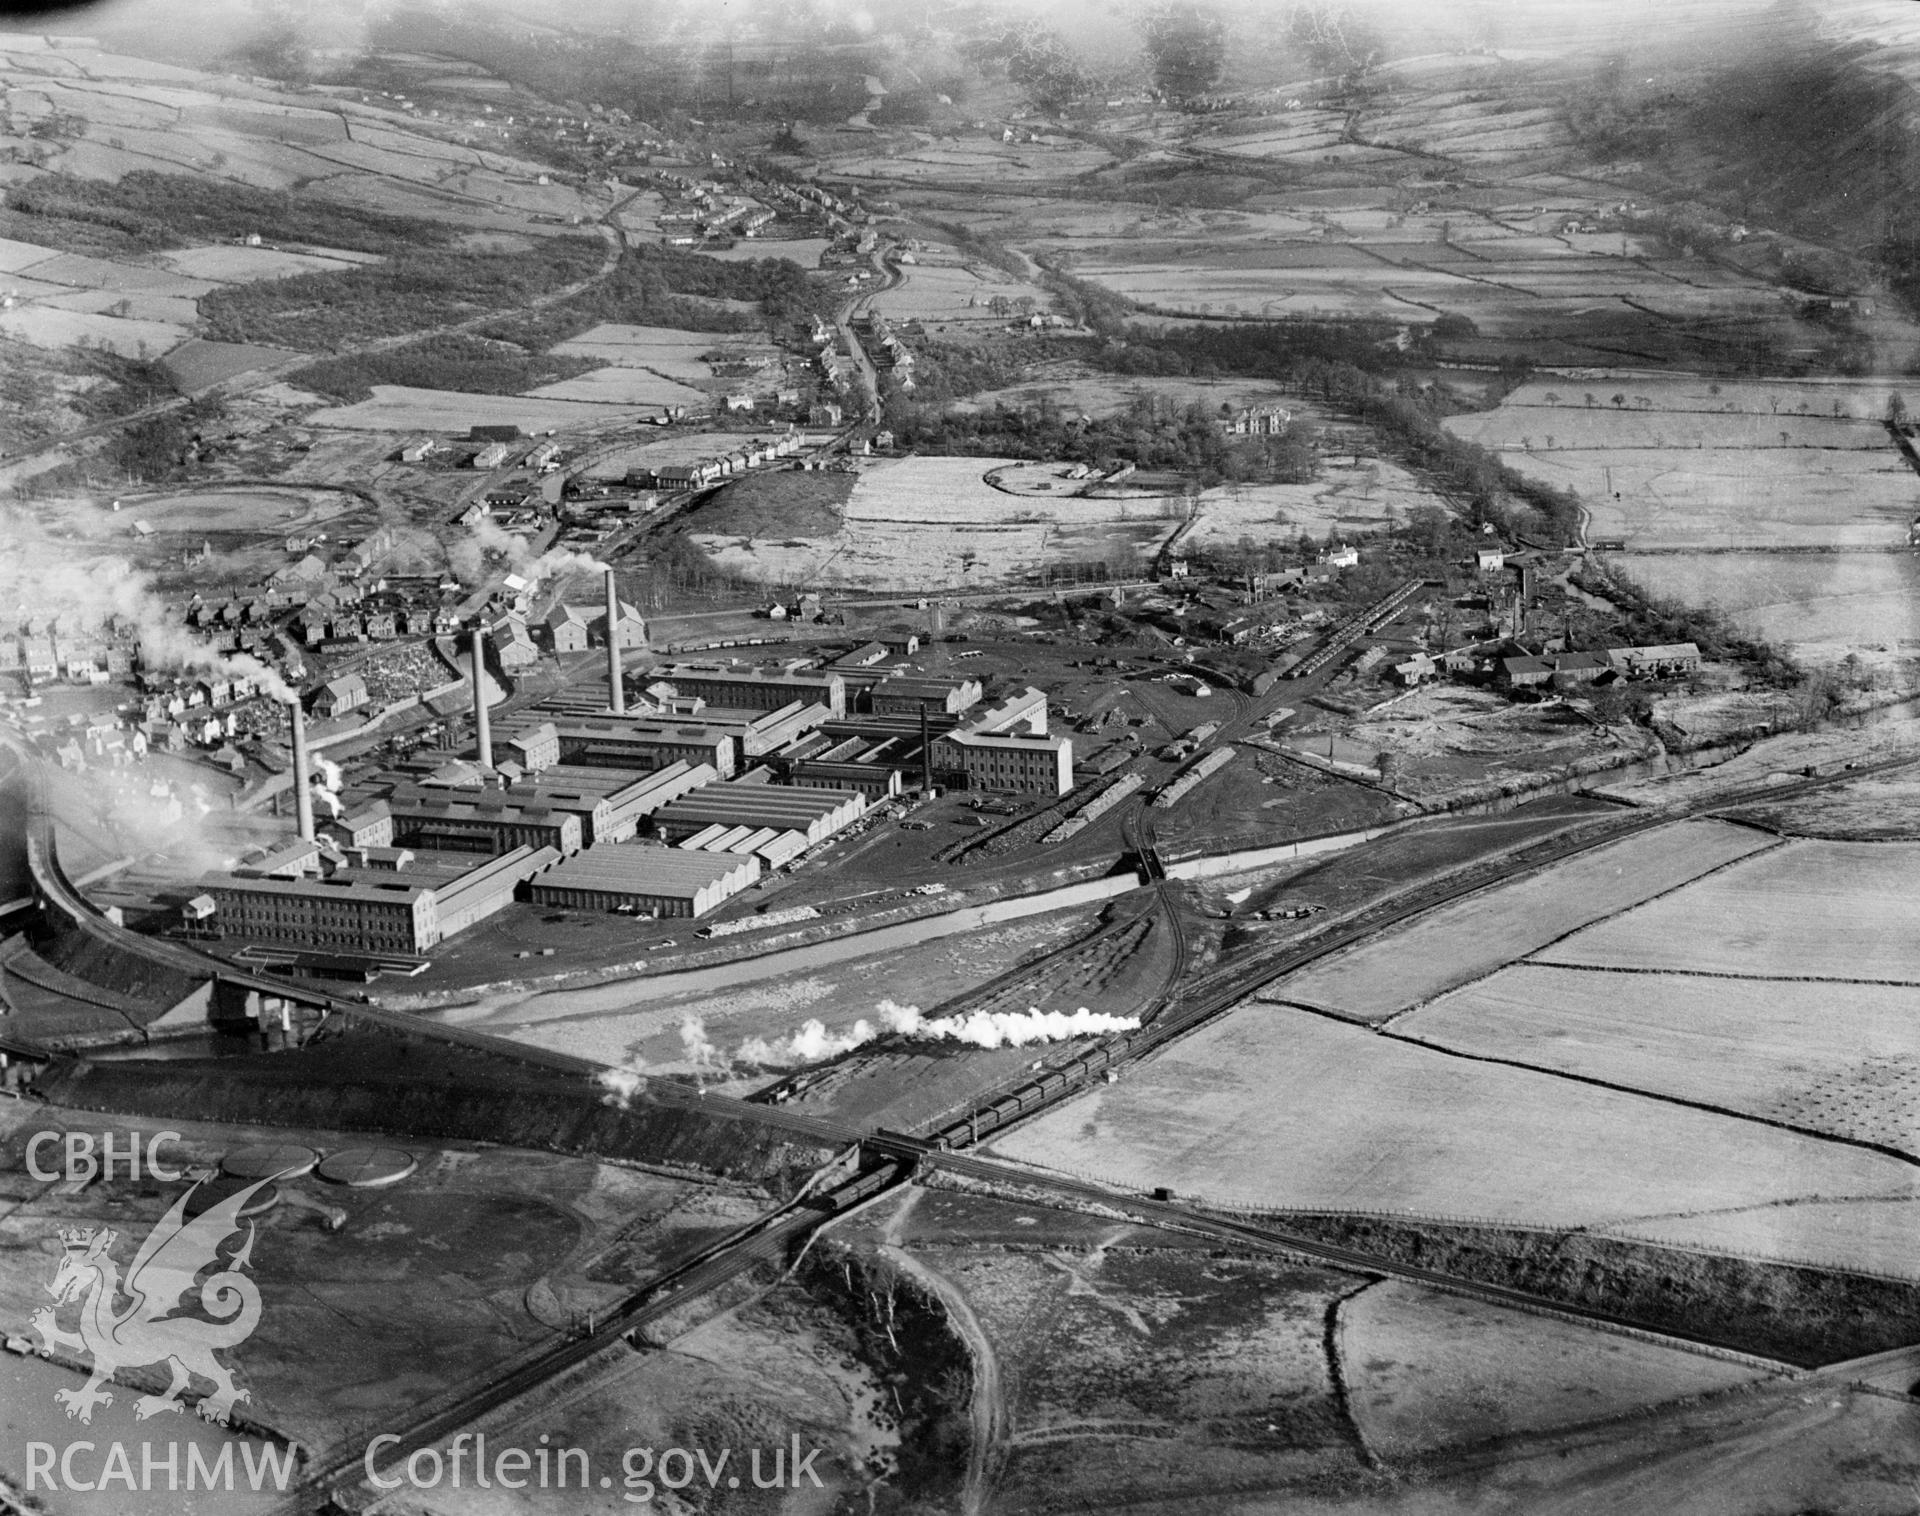 View of the Mond Nickel Company, Clydach looking Northeast up the Tawe Valley towards Trebanos. Clydach town centre is to the left. Oblique aerial view. 5?x4? black and white glass plate negative.